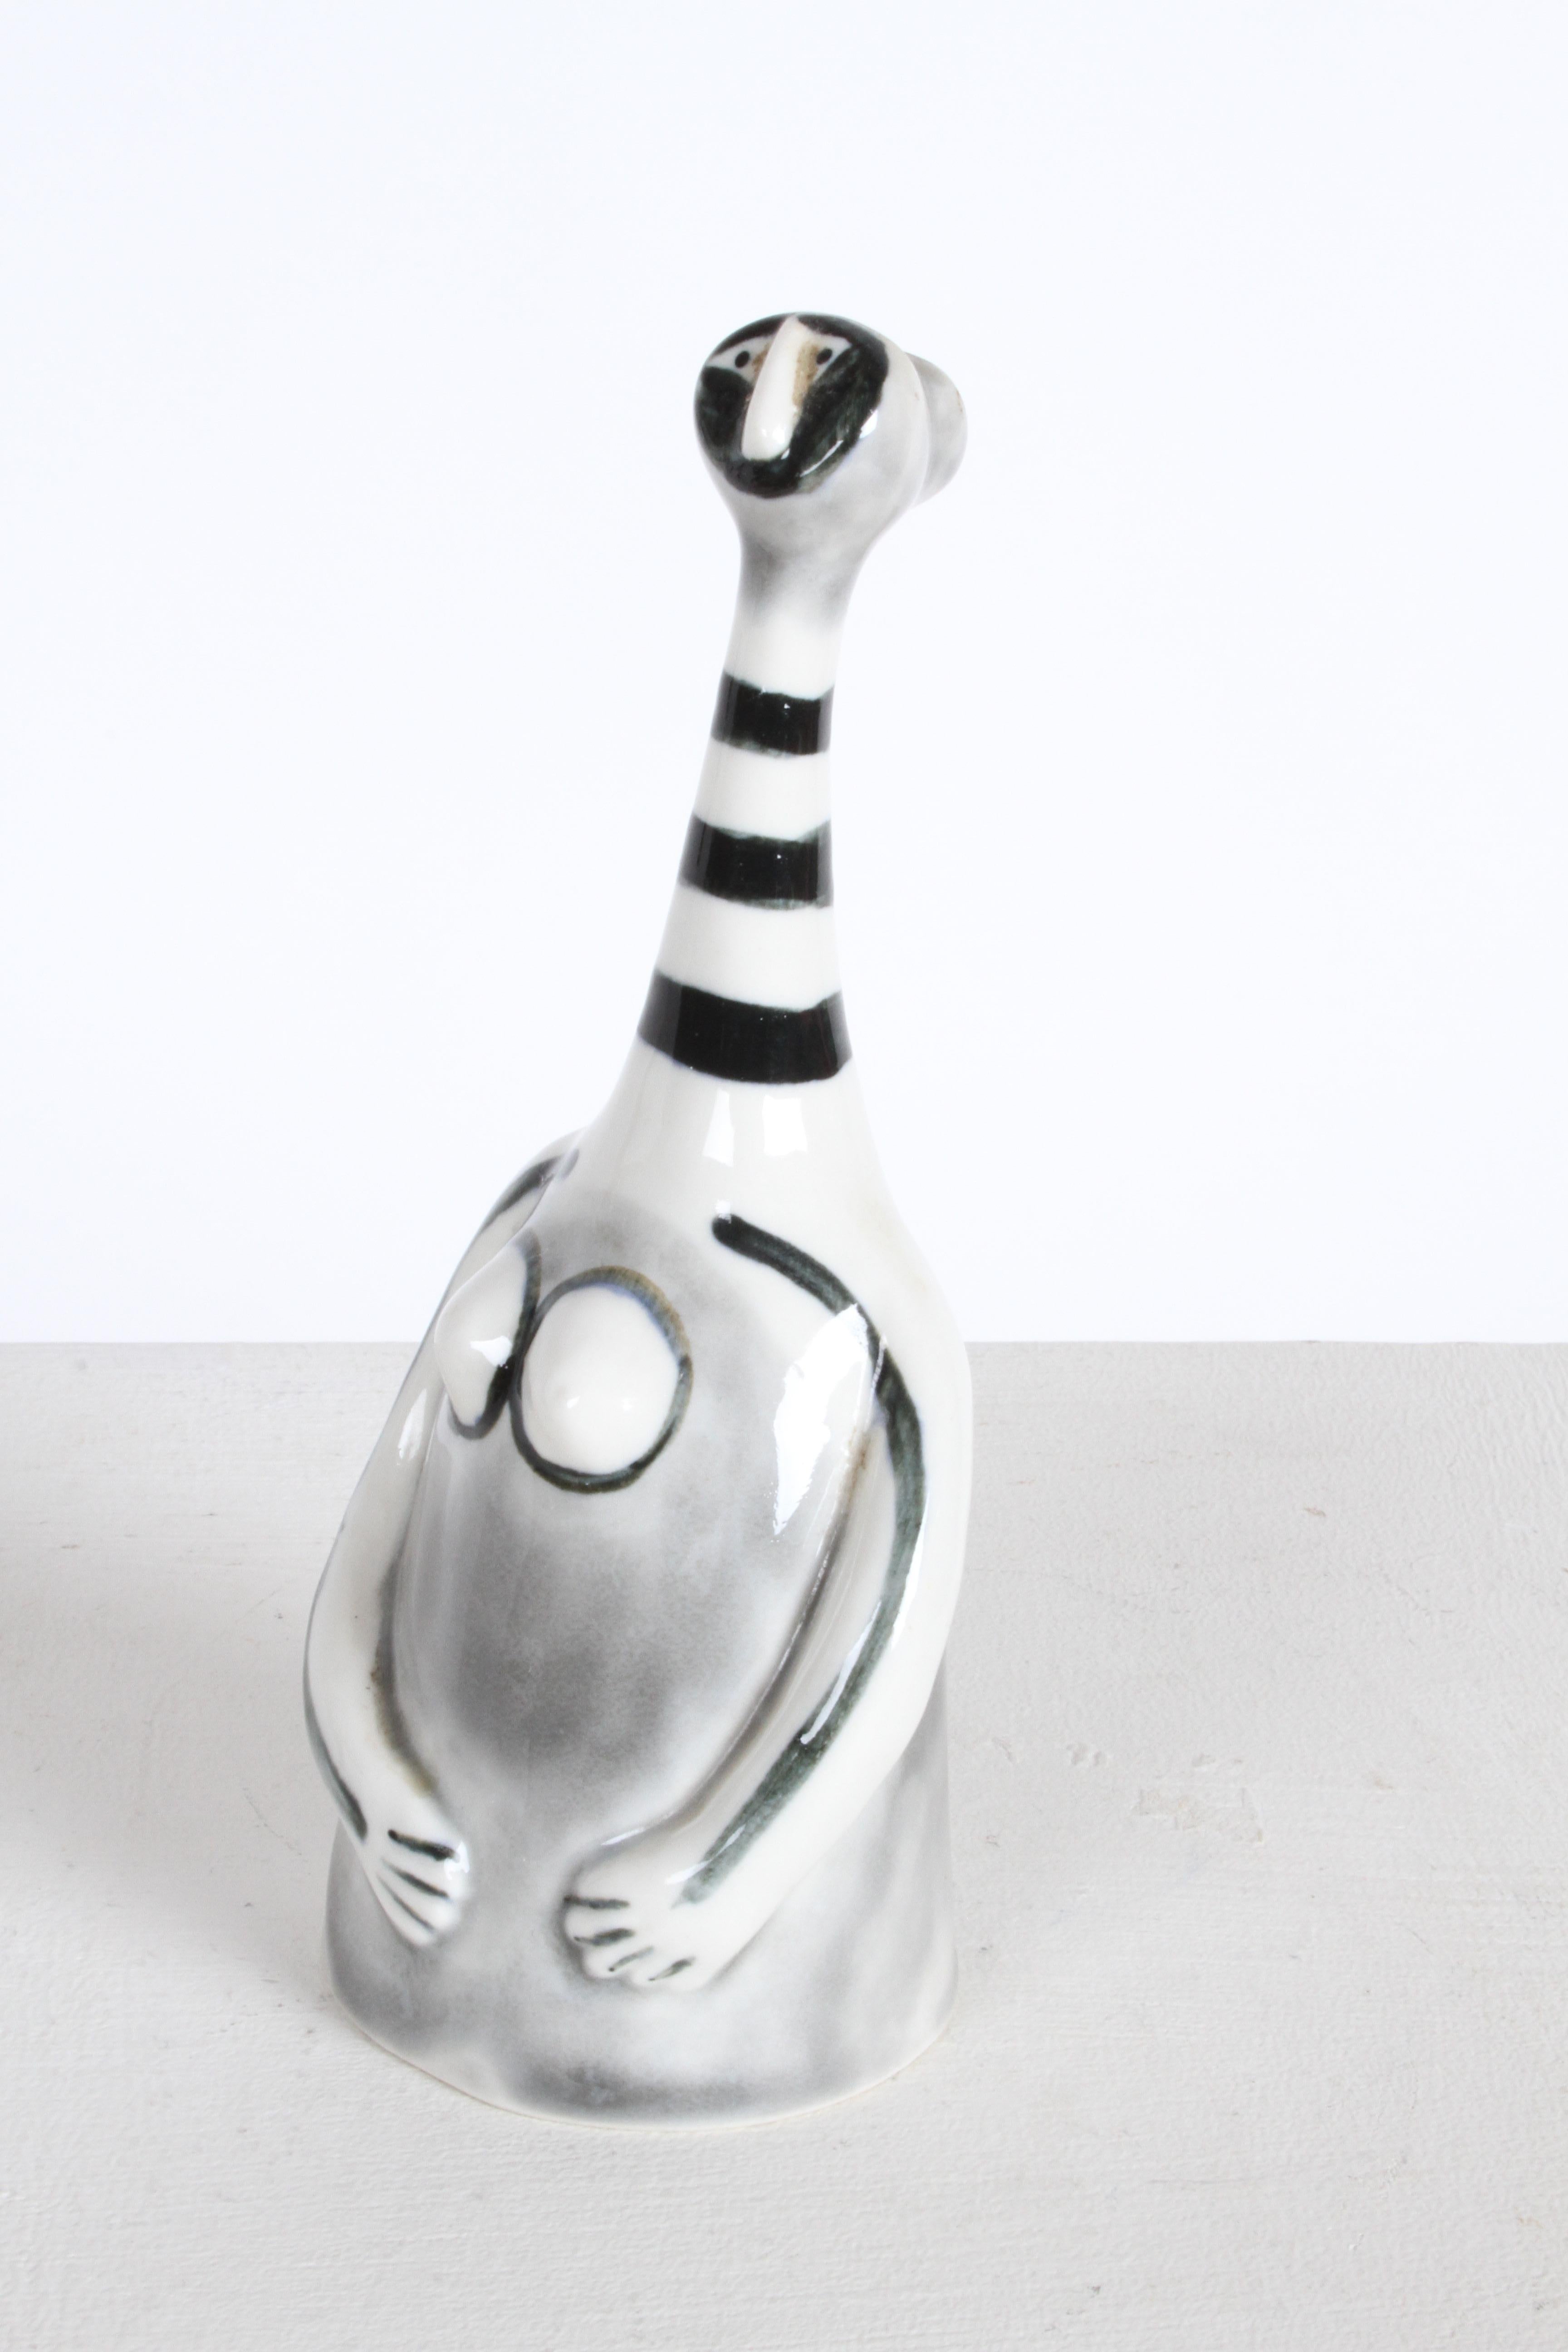 Mid-20th Century Picassoesque Ceramic Figure Dinner Bell by Jack Squier for Howat Kilns - Mexico For Sale